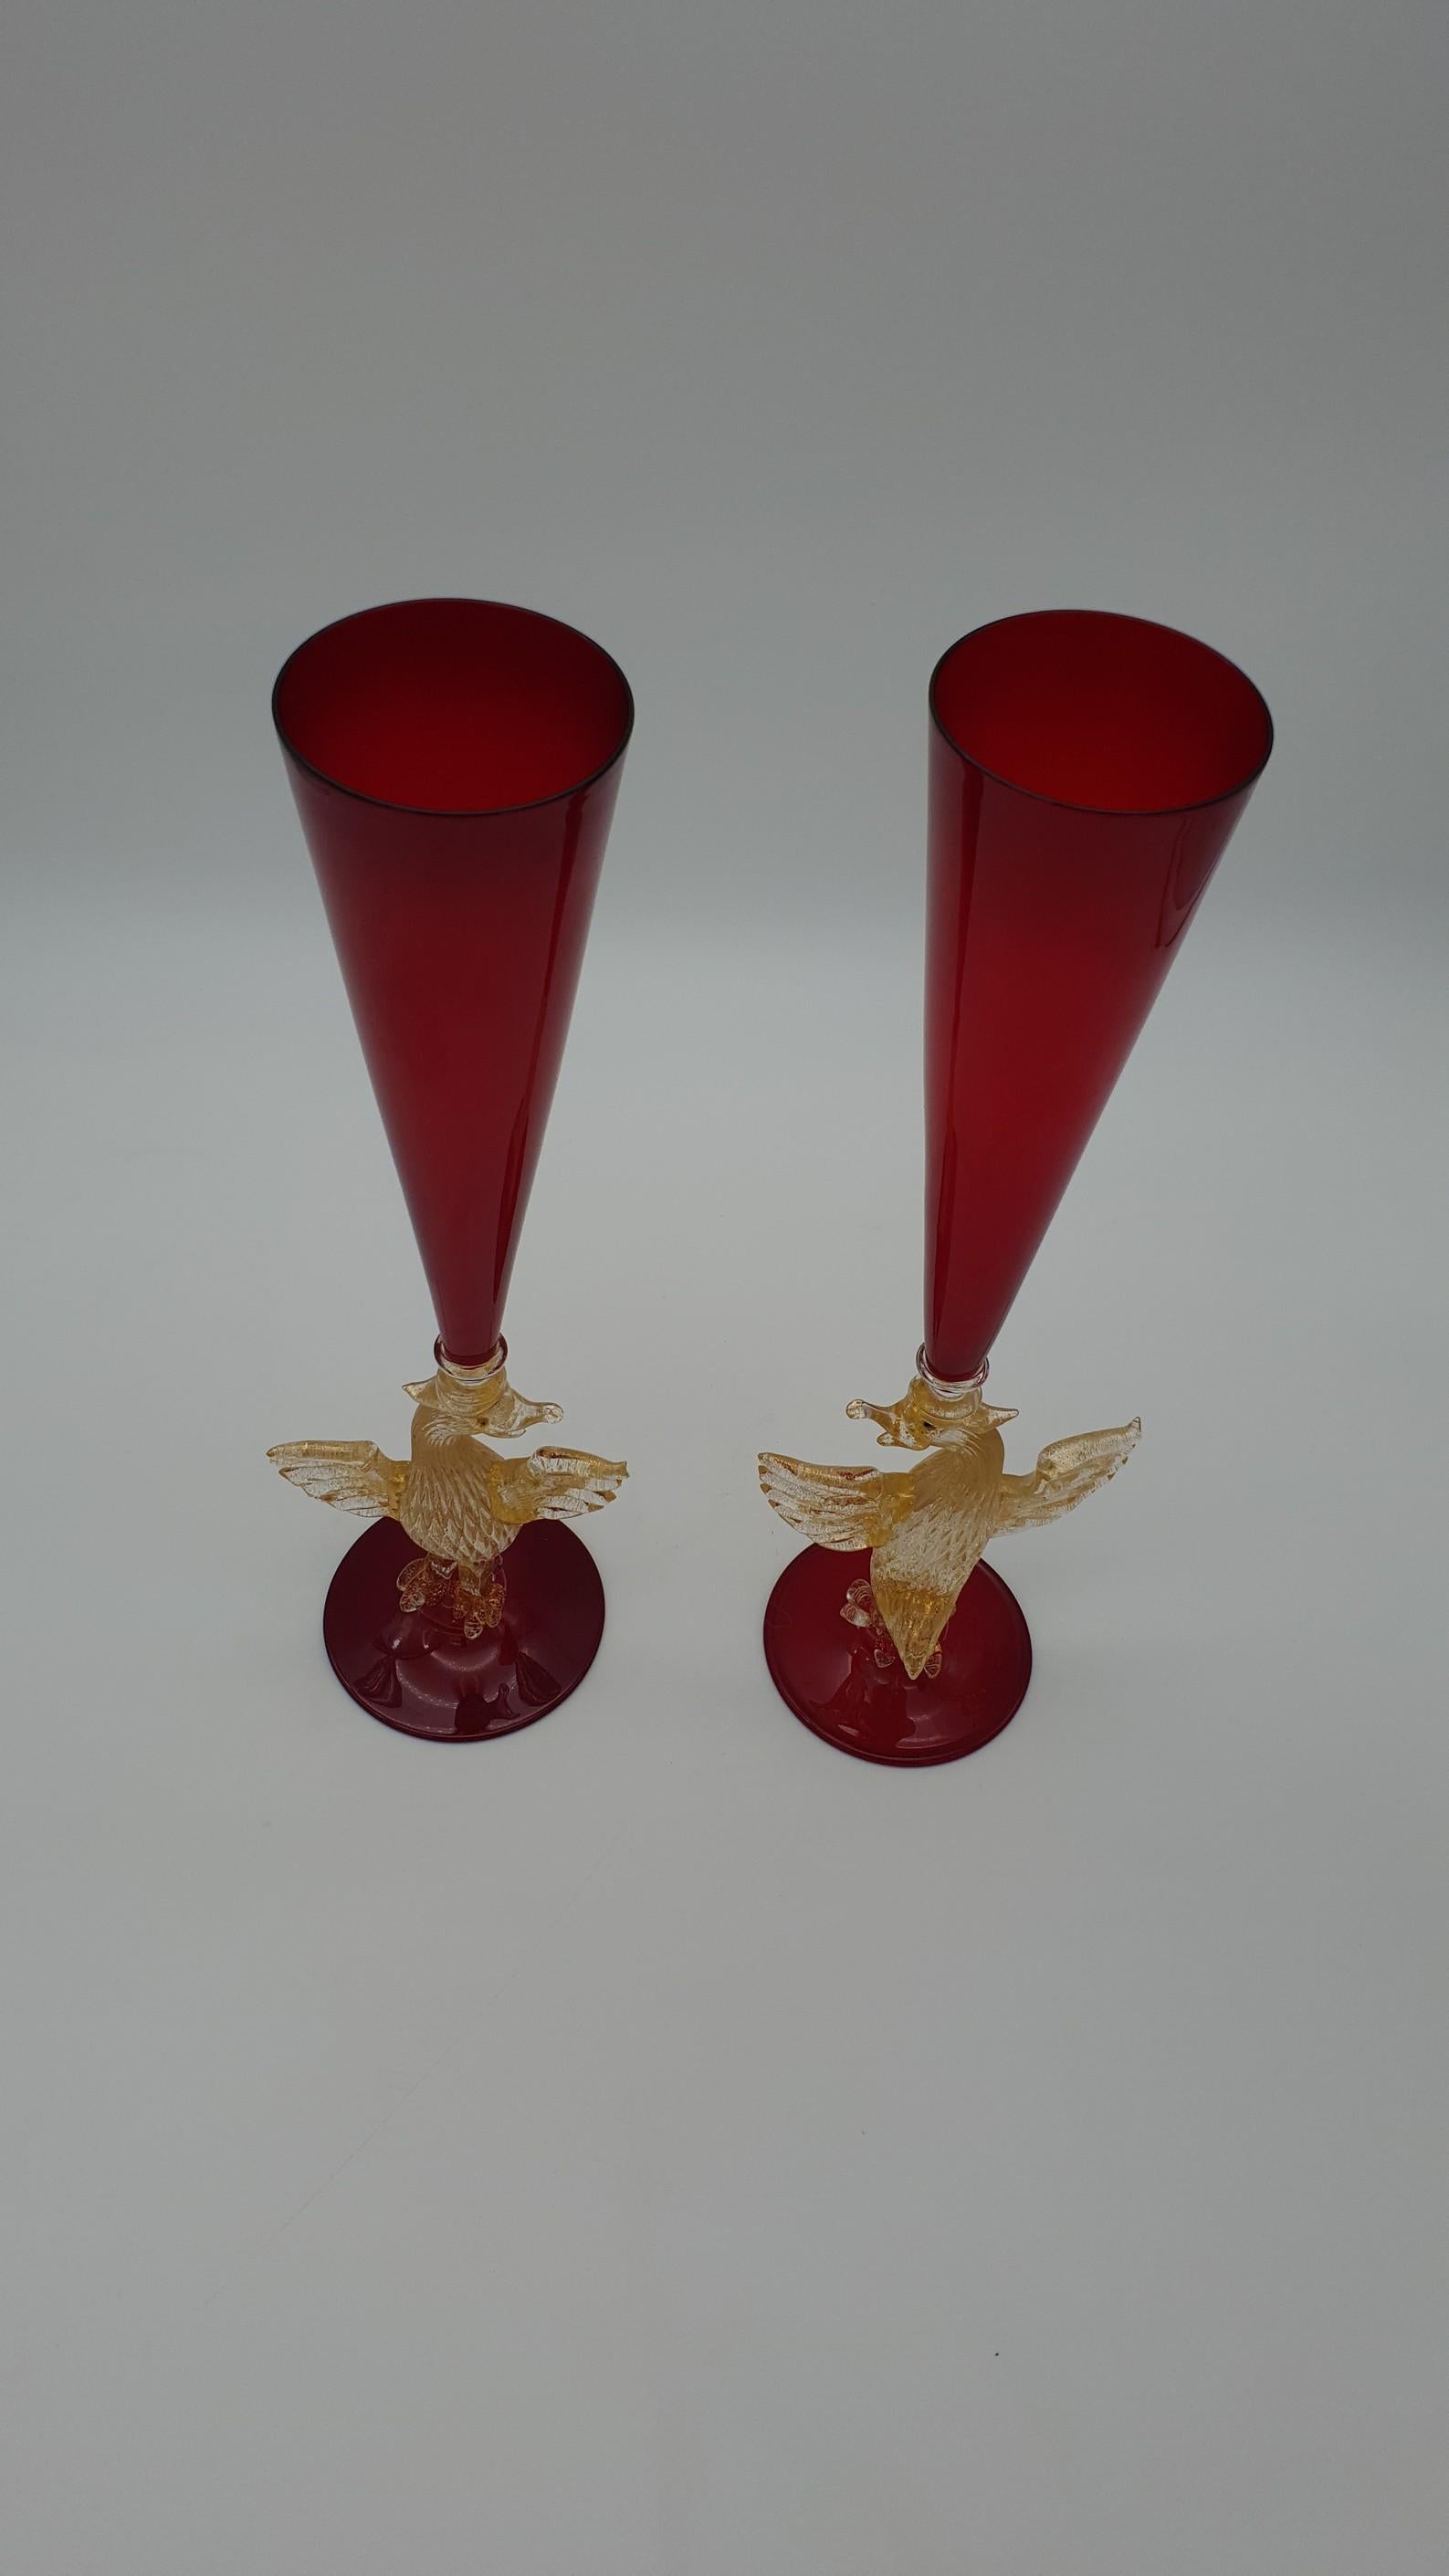 Pair of Modern Murano Glass Red Goblets with Gold Phoenix by Gino Cenedese 1990s For Sale 6